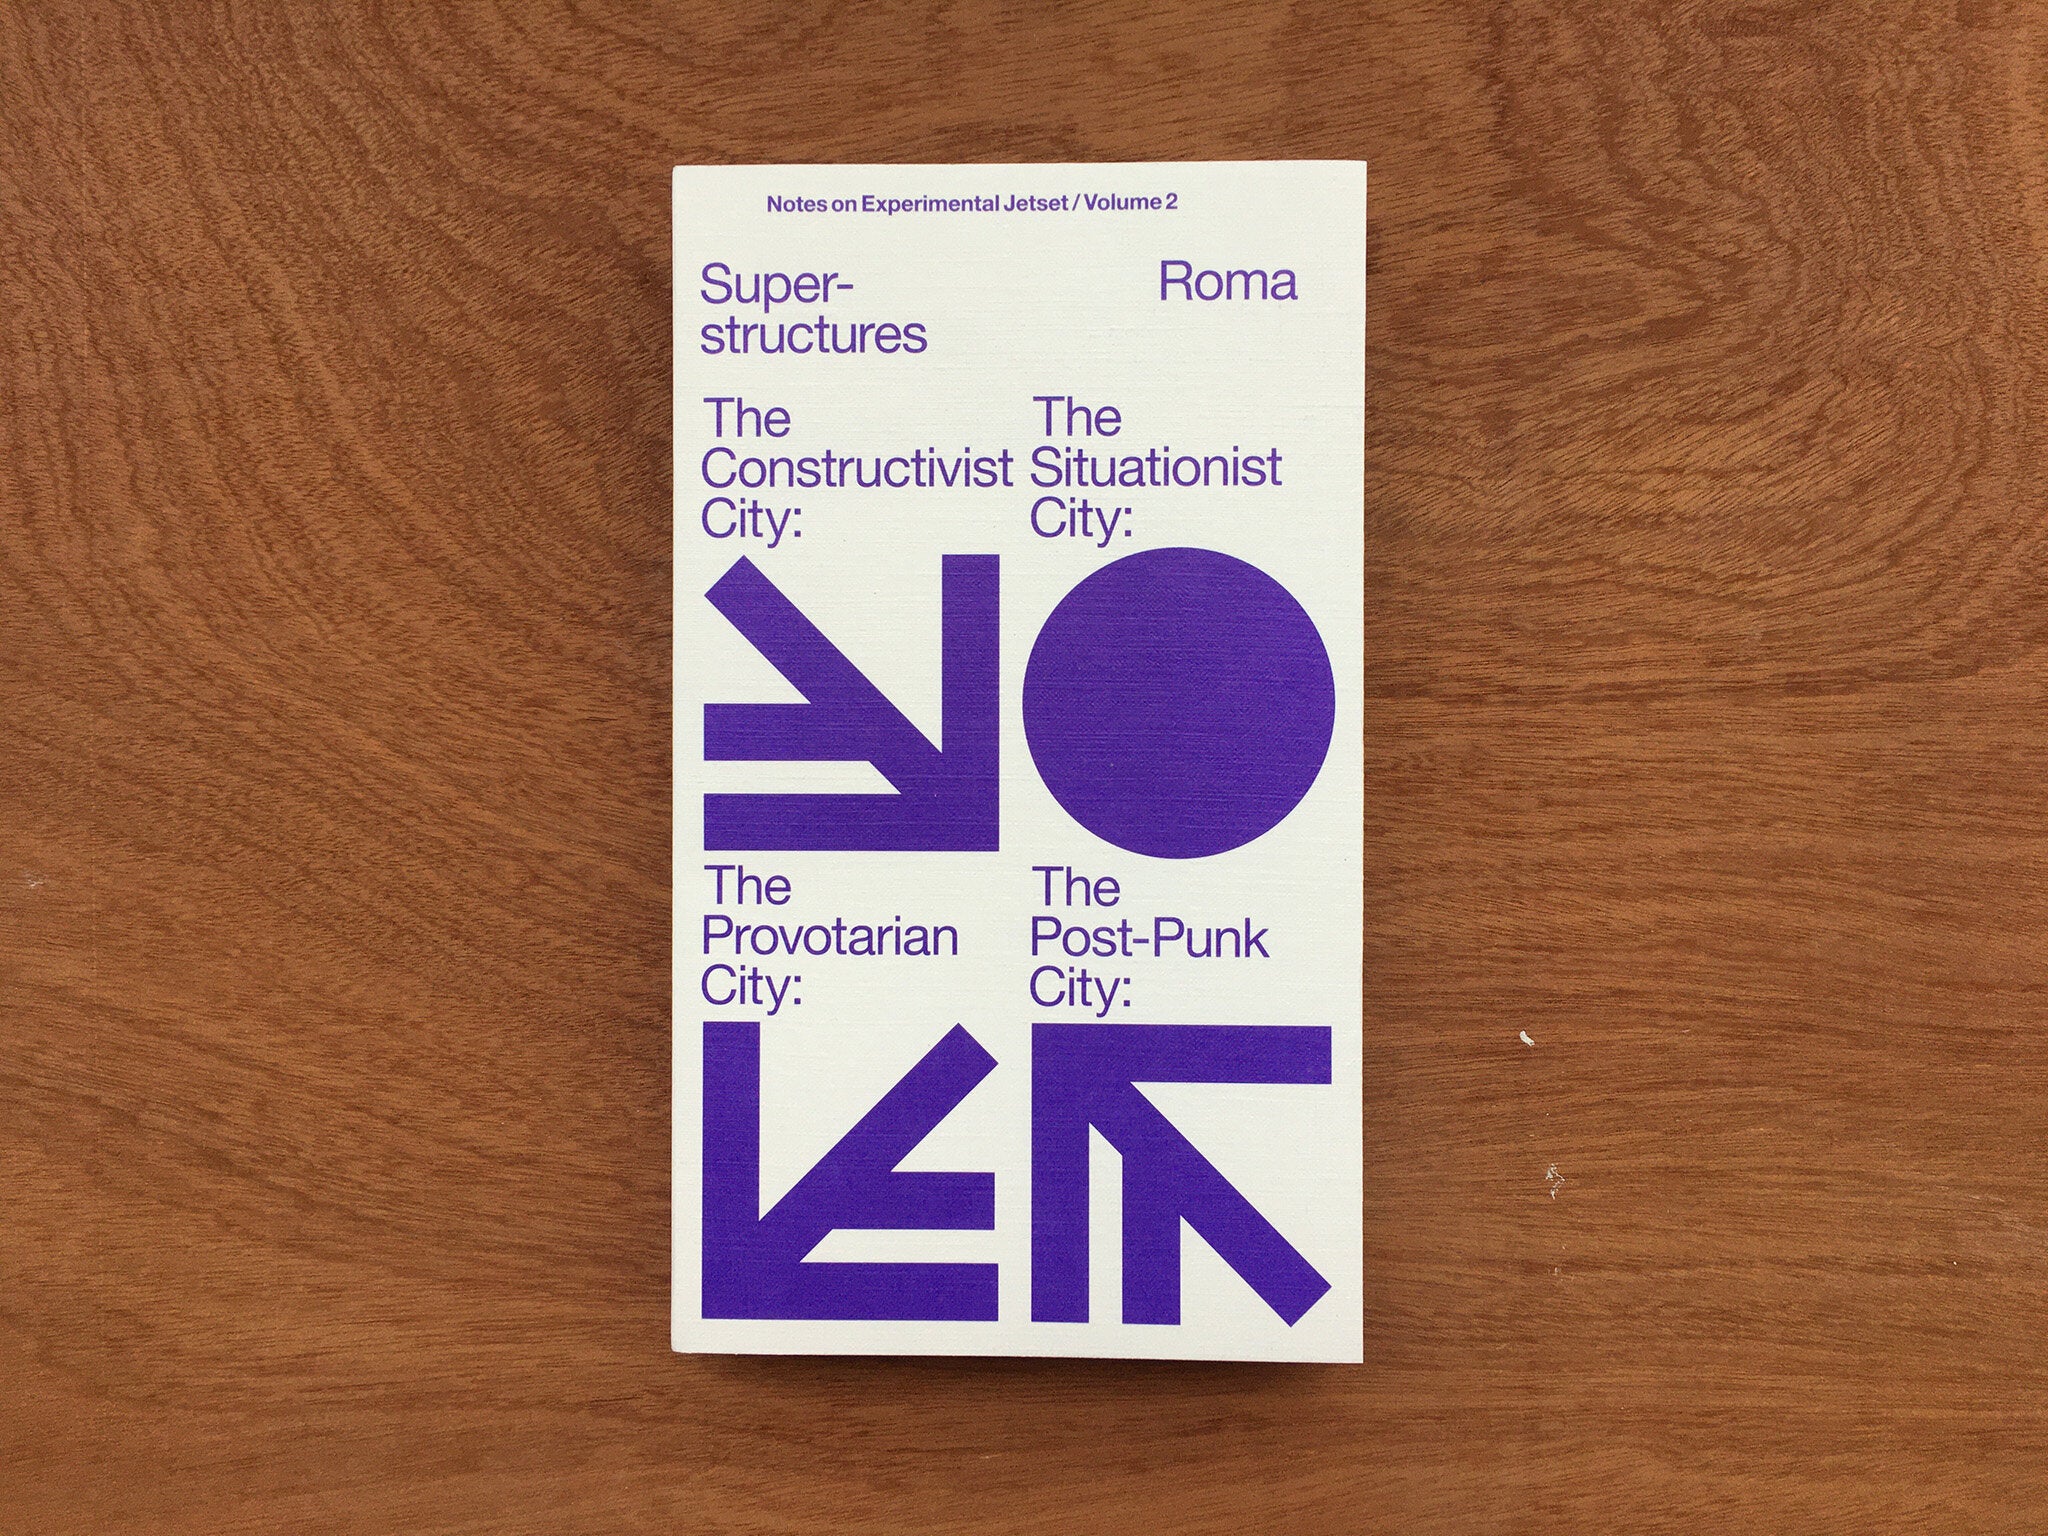 SUPERSTRUCTURES (NOTES ON EXPERIMENTAL JETSET / VOLUME 2) by Experimental Jetset